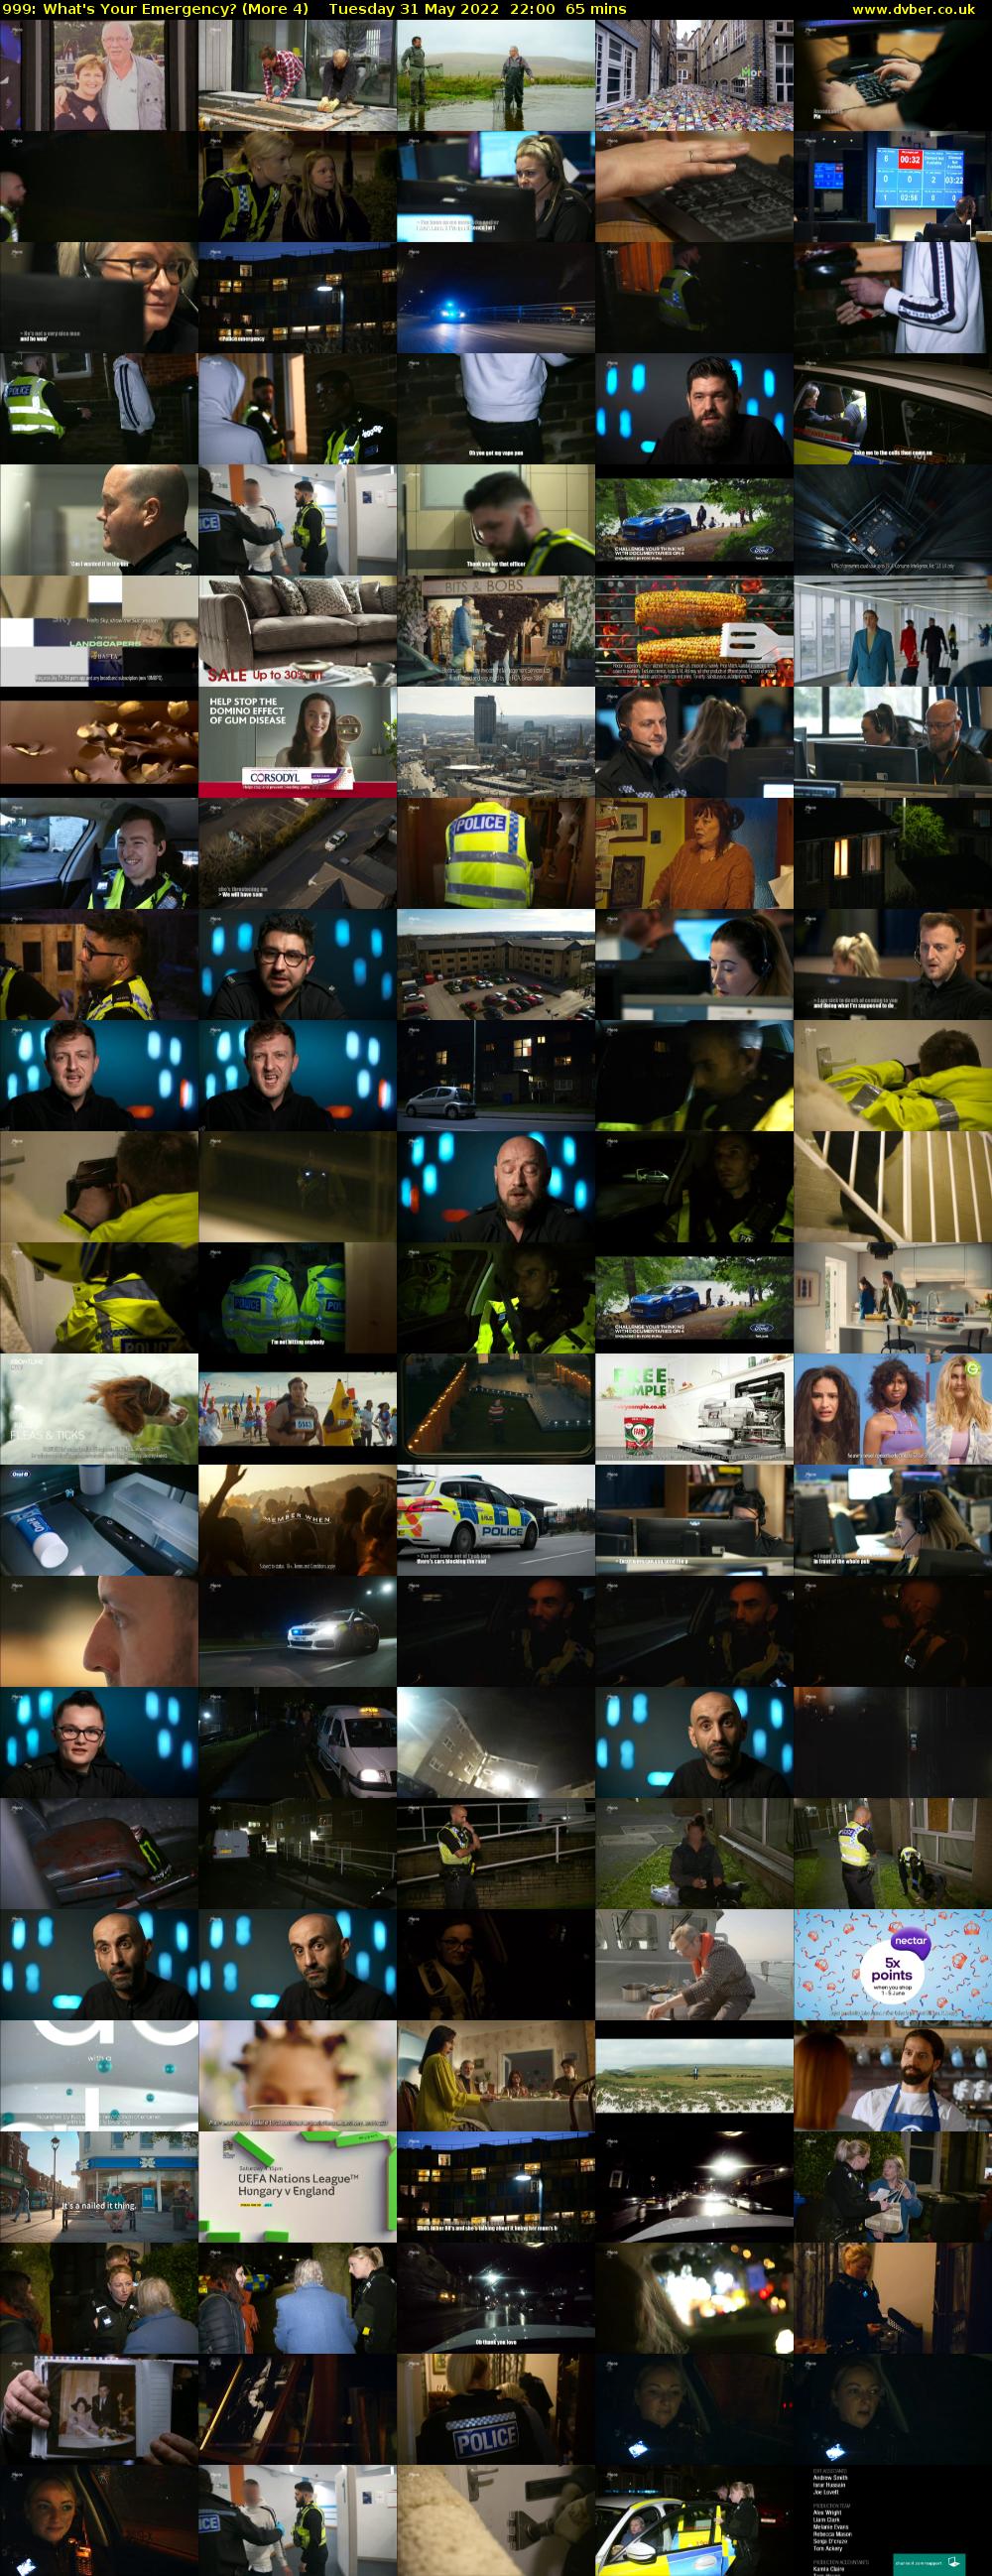 999: What's Your Emergency? (More 4) Tuesday 31 May 2022 22:00 - 23:05